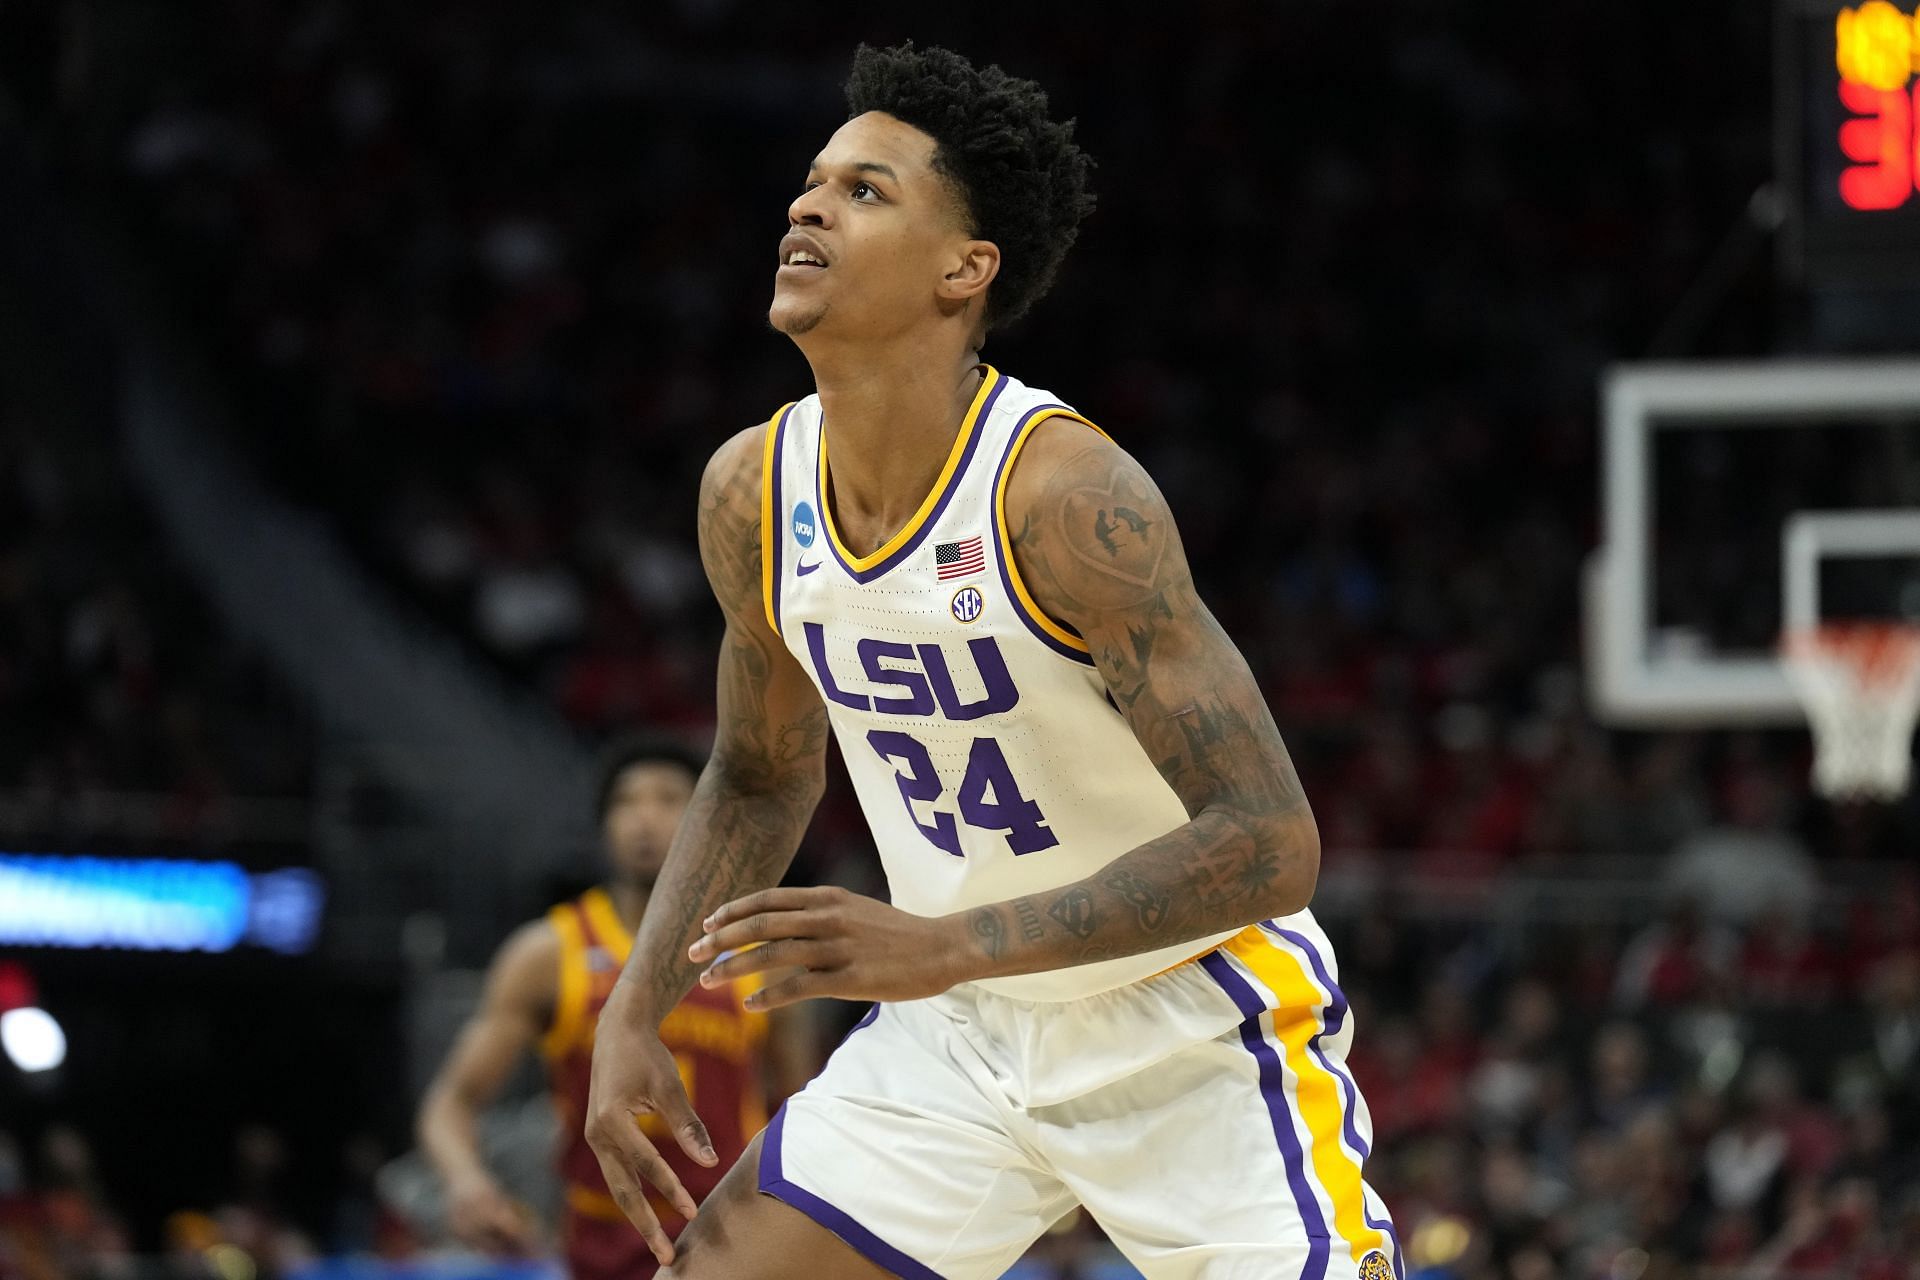 He's no f**kin chance getting drafted, Bro gonna be selected just  because it's Shaq son, All due respect he averaged 3 PPG at LSU this  year - Fans utterly deflated over news of Shaquille O'Neal's son Shareef  becoming eligible for 2022 NBA Draft